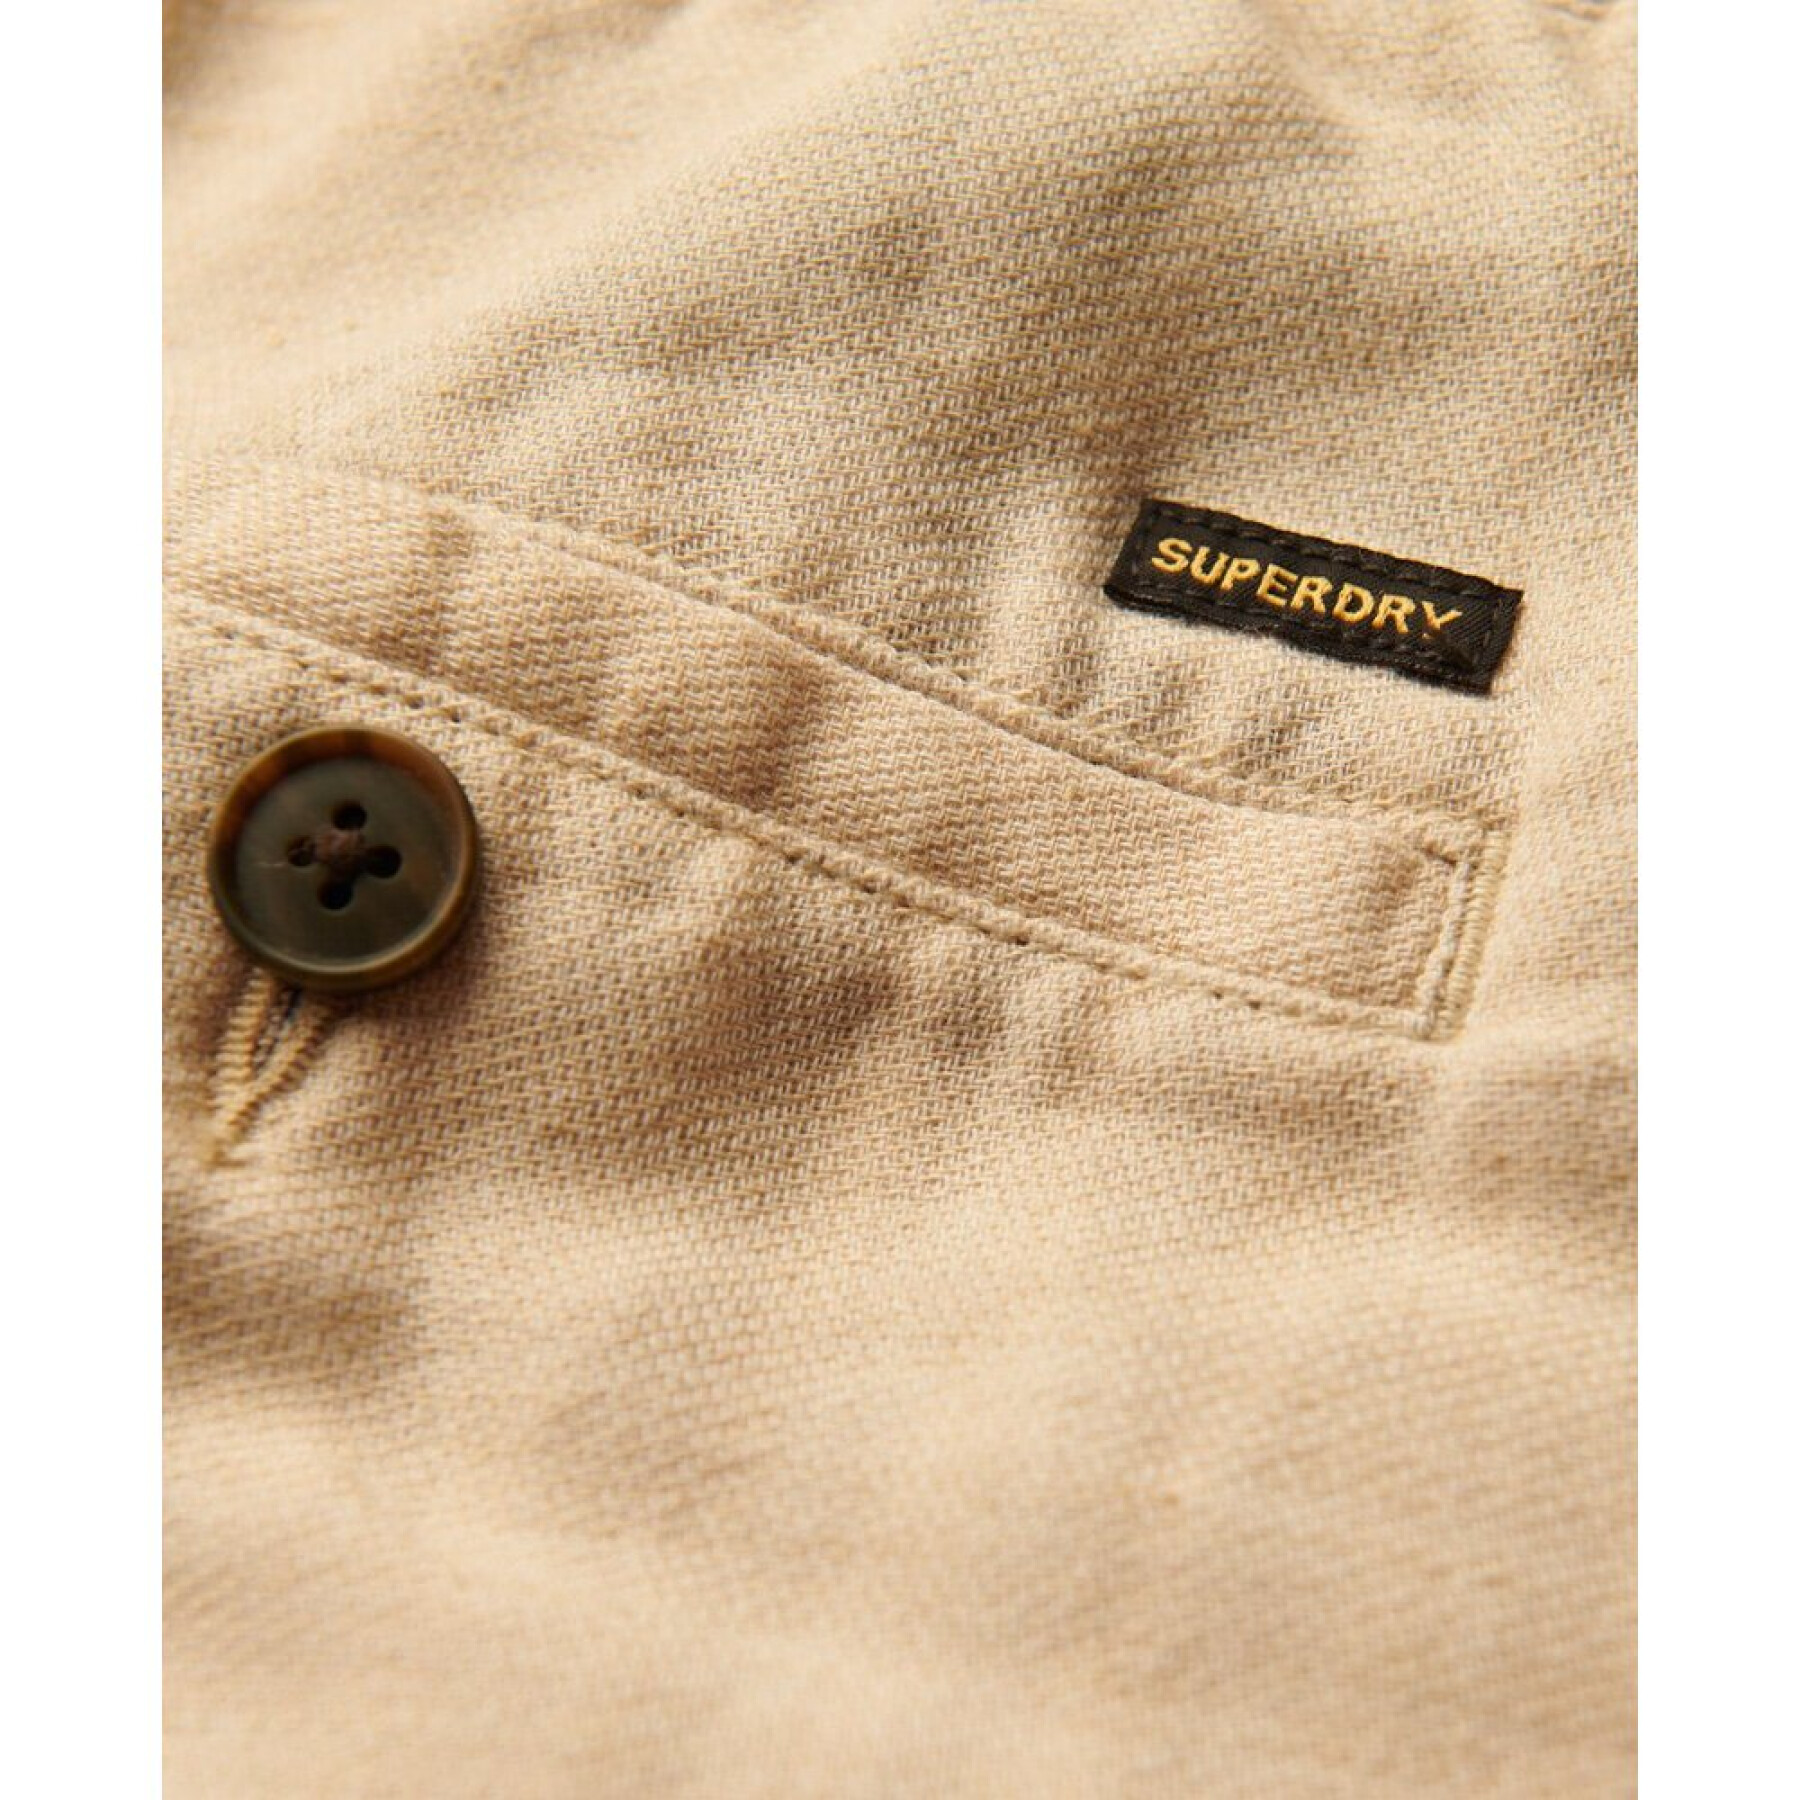 Linen shorts with drawstring Superdry